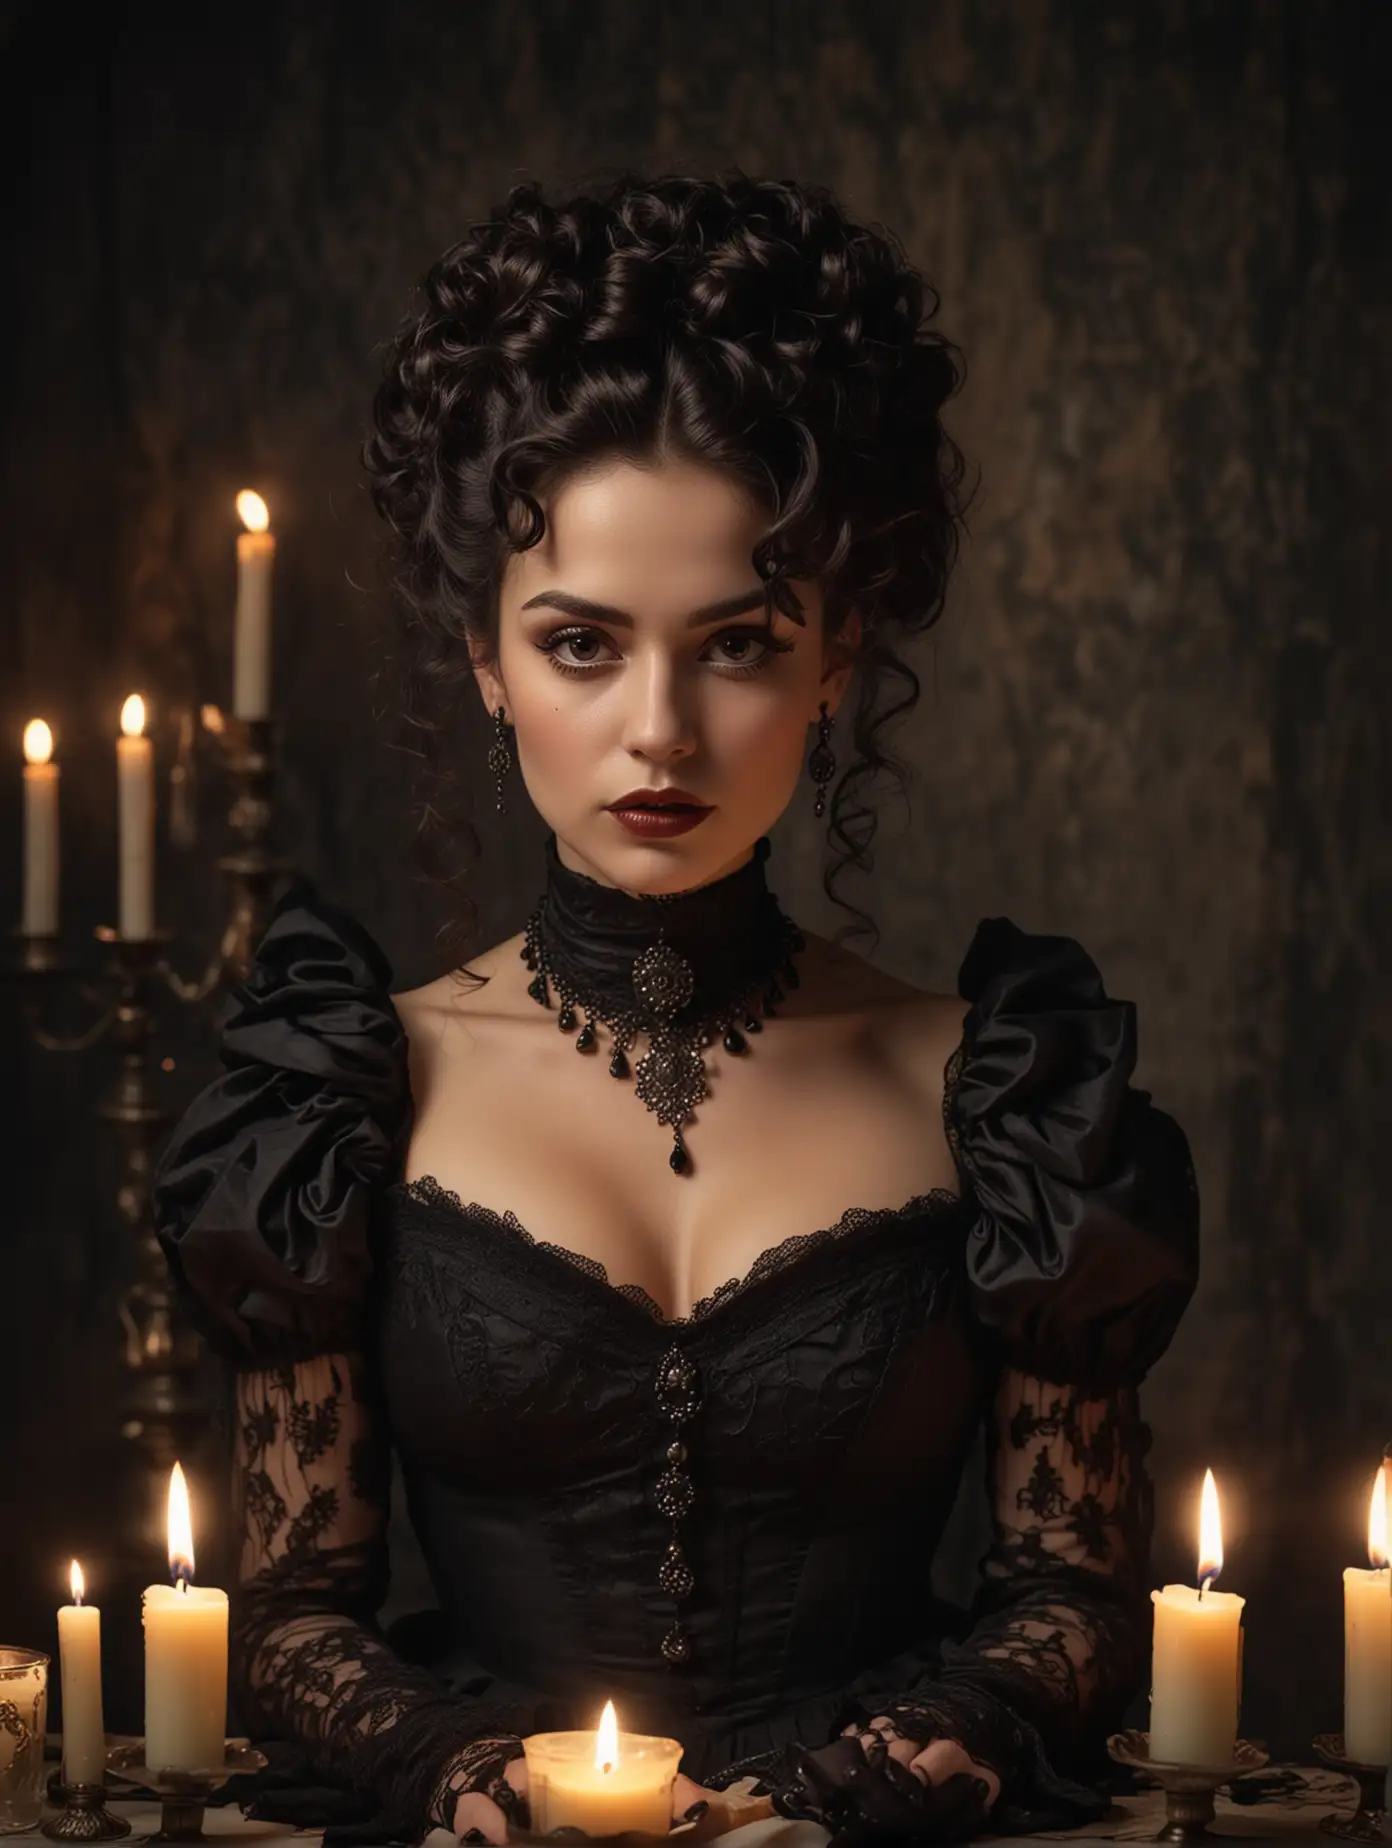 Victorian Era Woman Portrait with Dark Candles and Gothic Accents